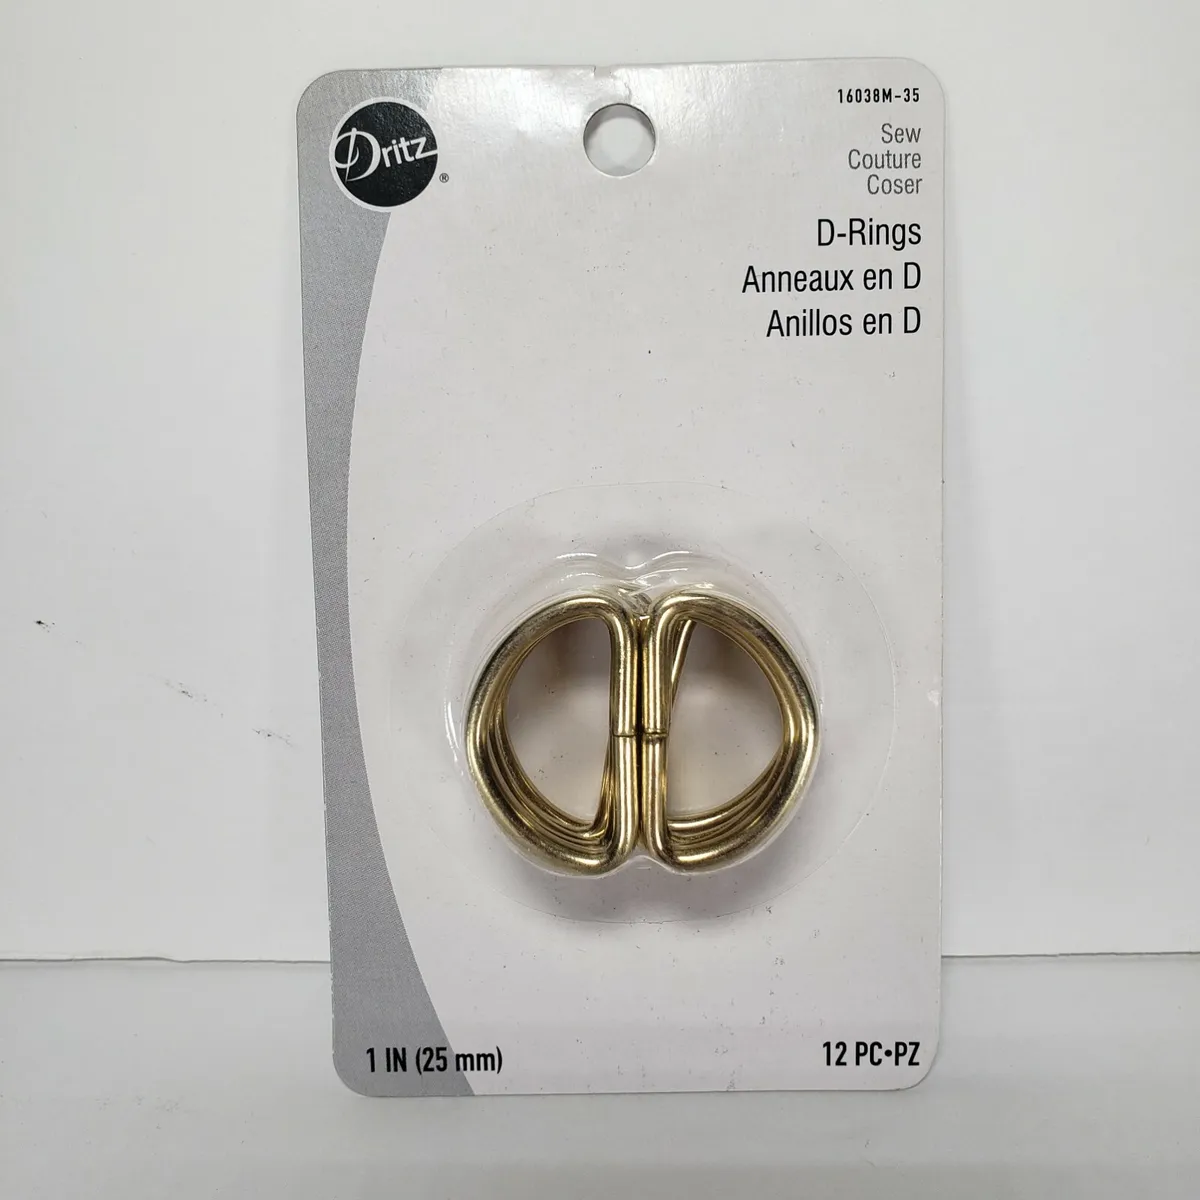 Dritz D Rings 1 inch 12 pieces Sew Couture Belts